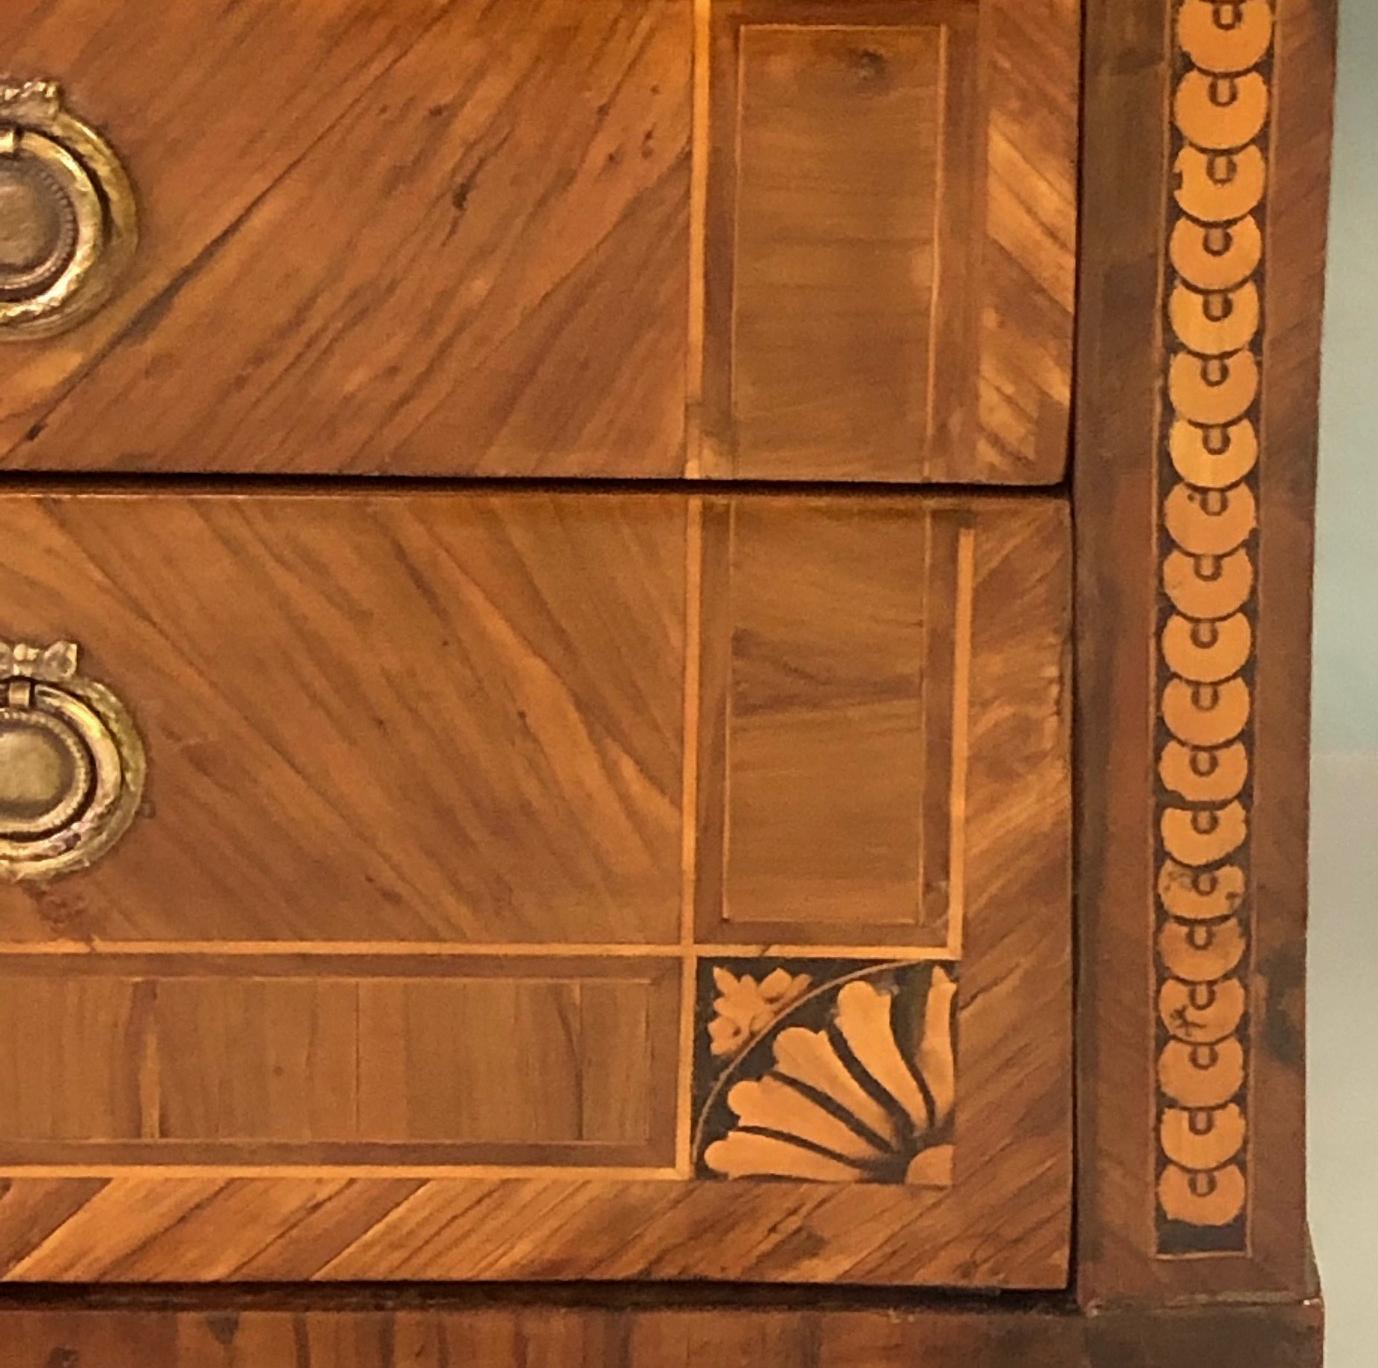 Of mixed woods with marquetry and parquetry inlay; the rectangular top with large central reserve within a cross-banded border; the body fitted with 3 long drawers with herring-bone veneer adorned with spandrels and imbricated decoration with